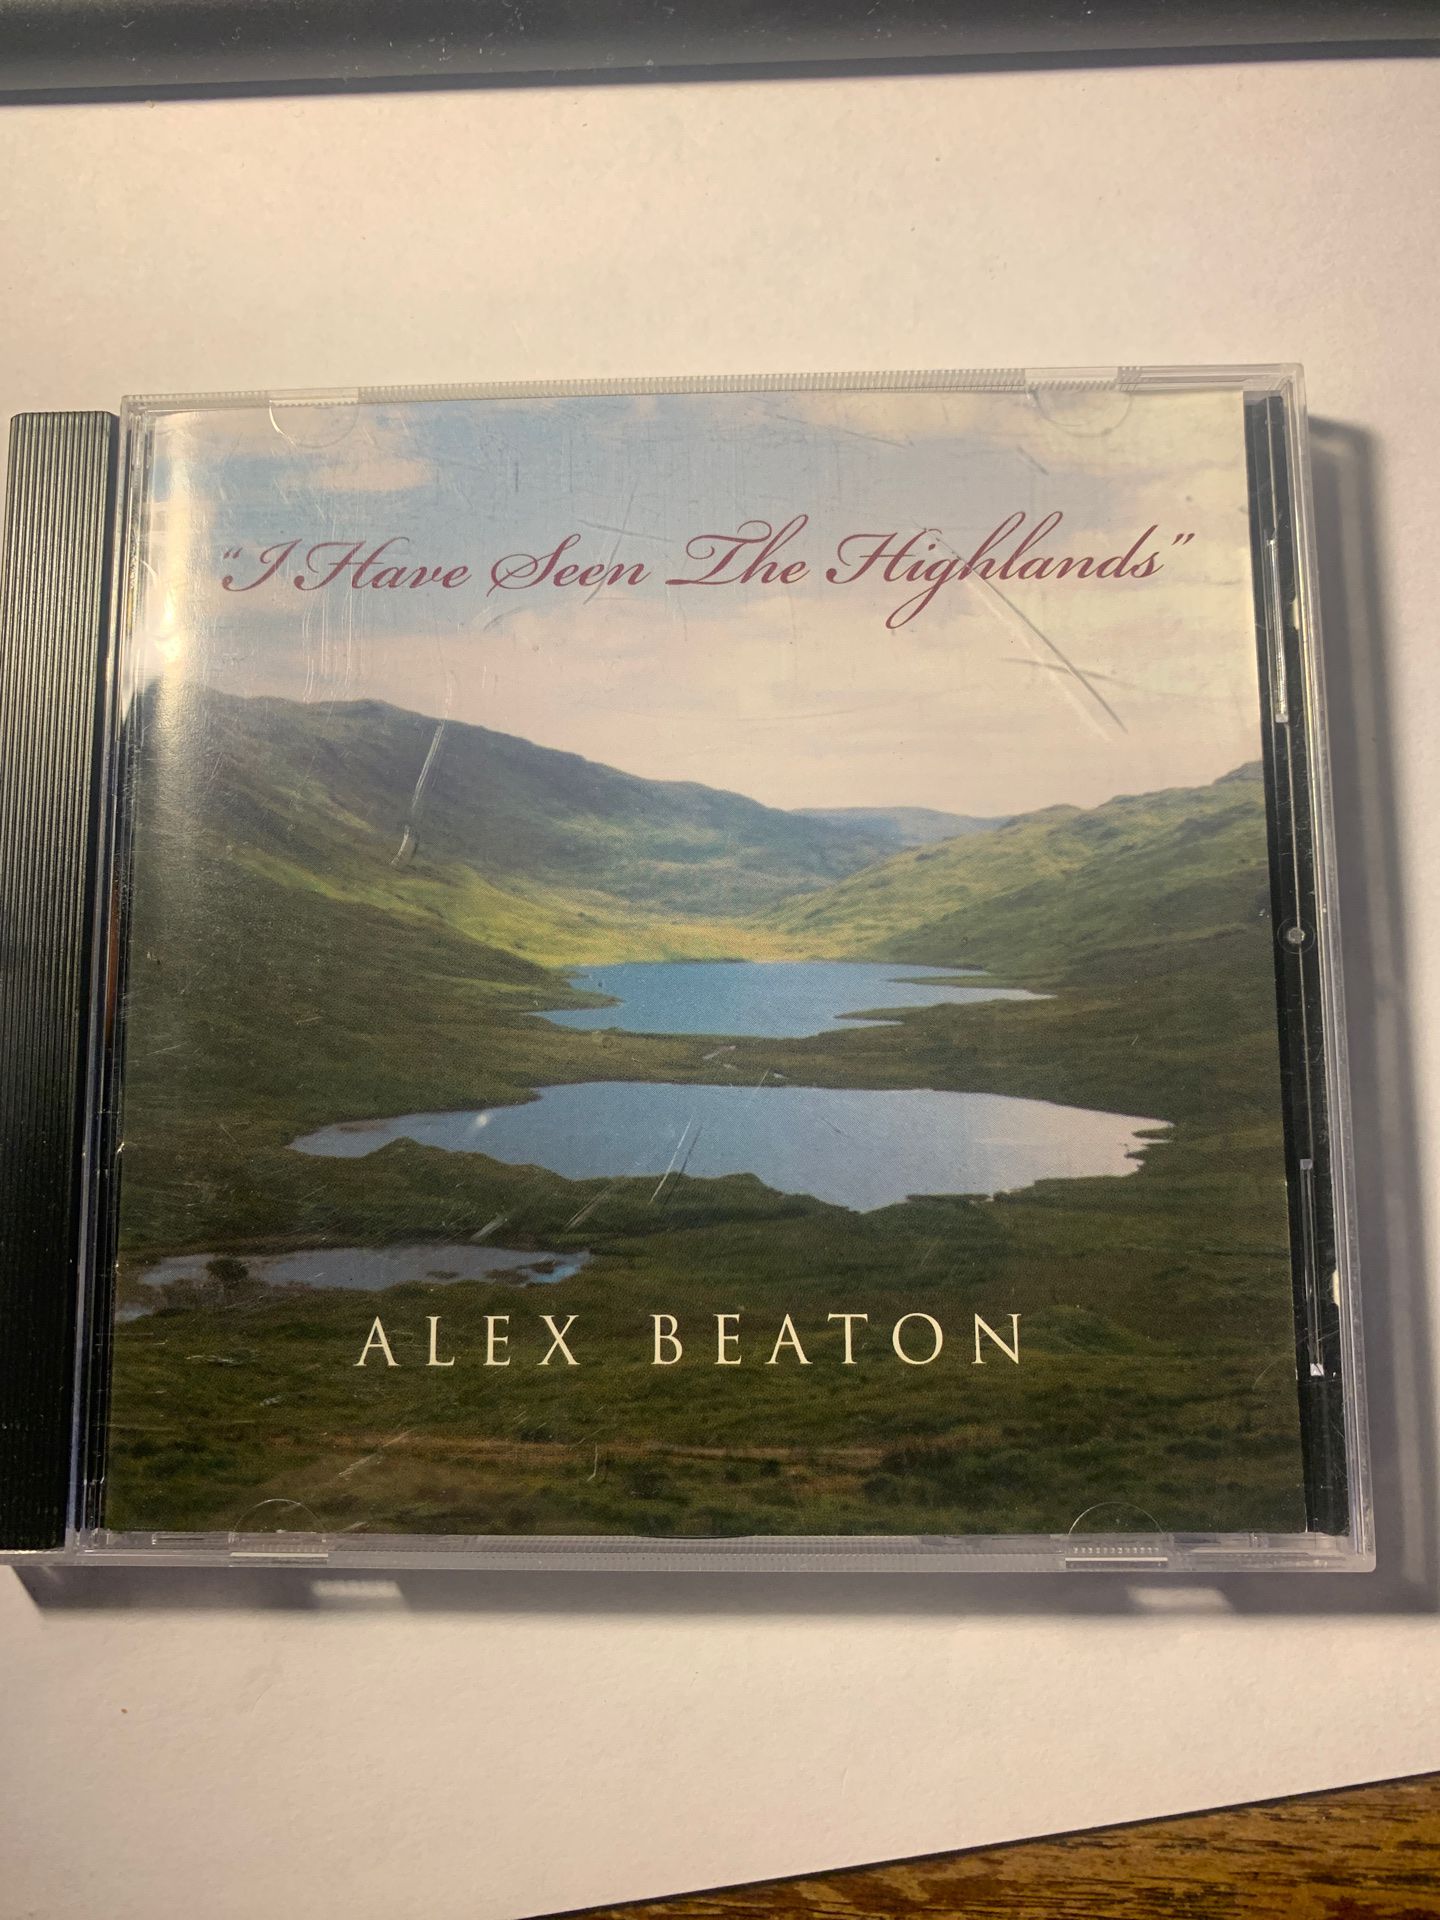 Alex Beaton - I Have Seen the Highlands cd